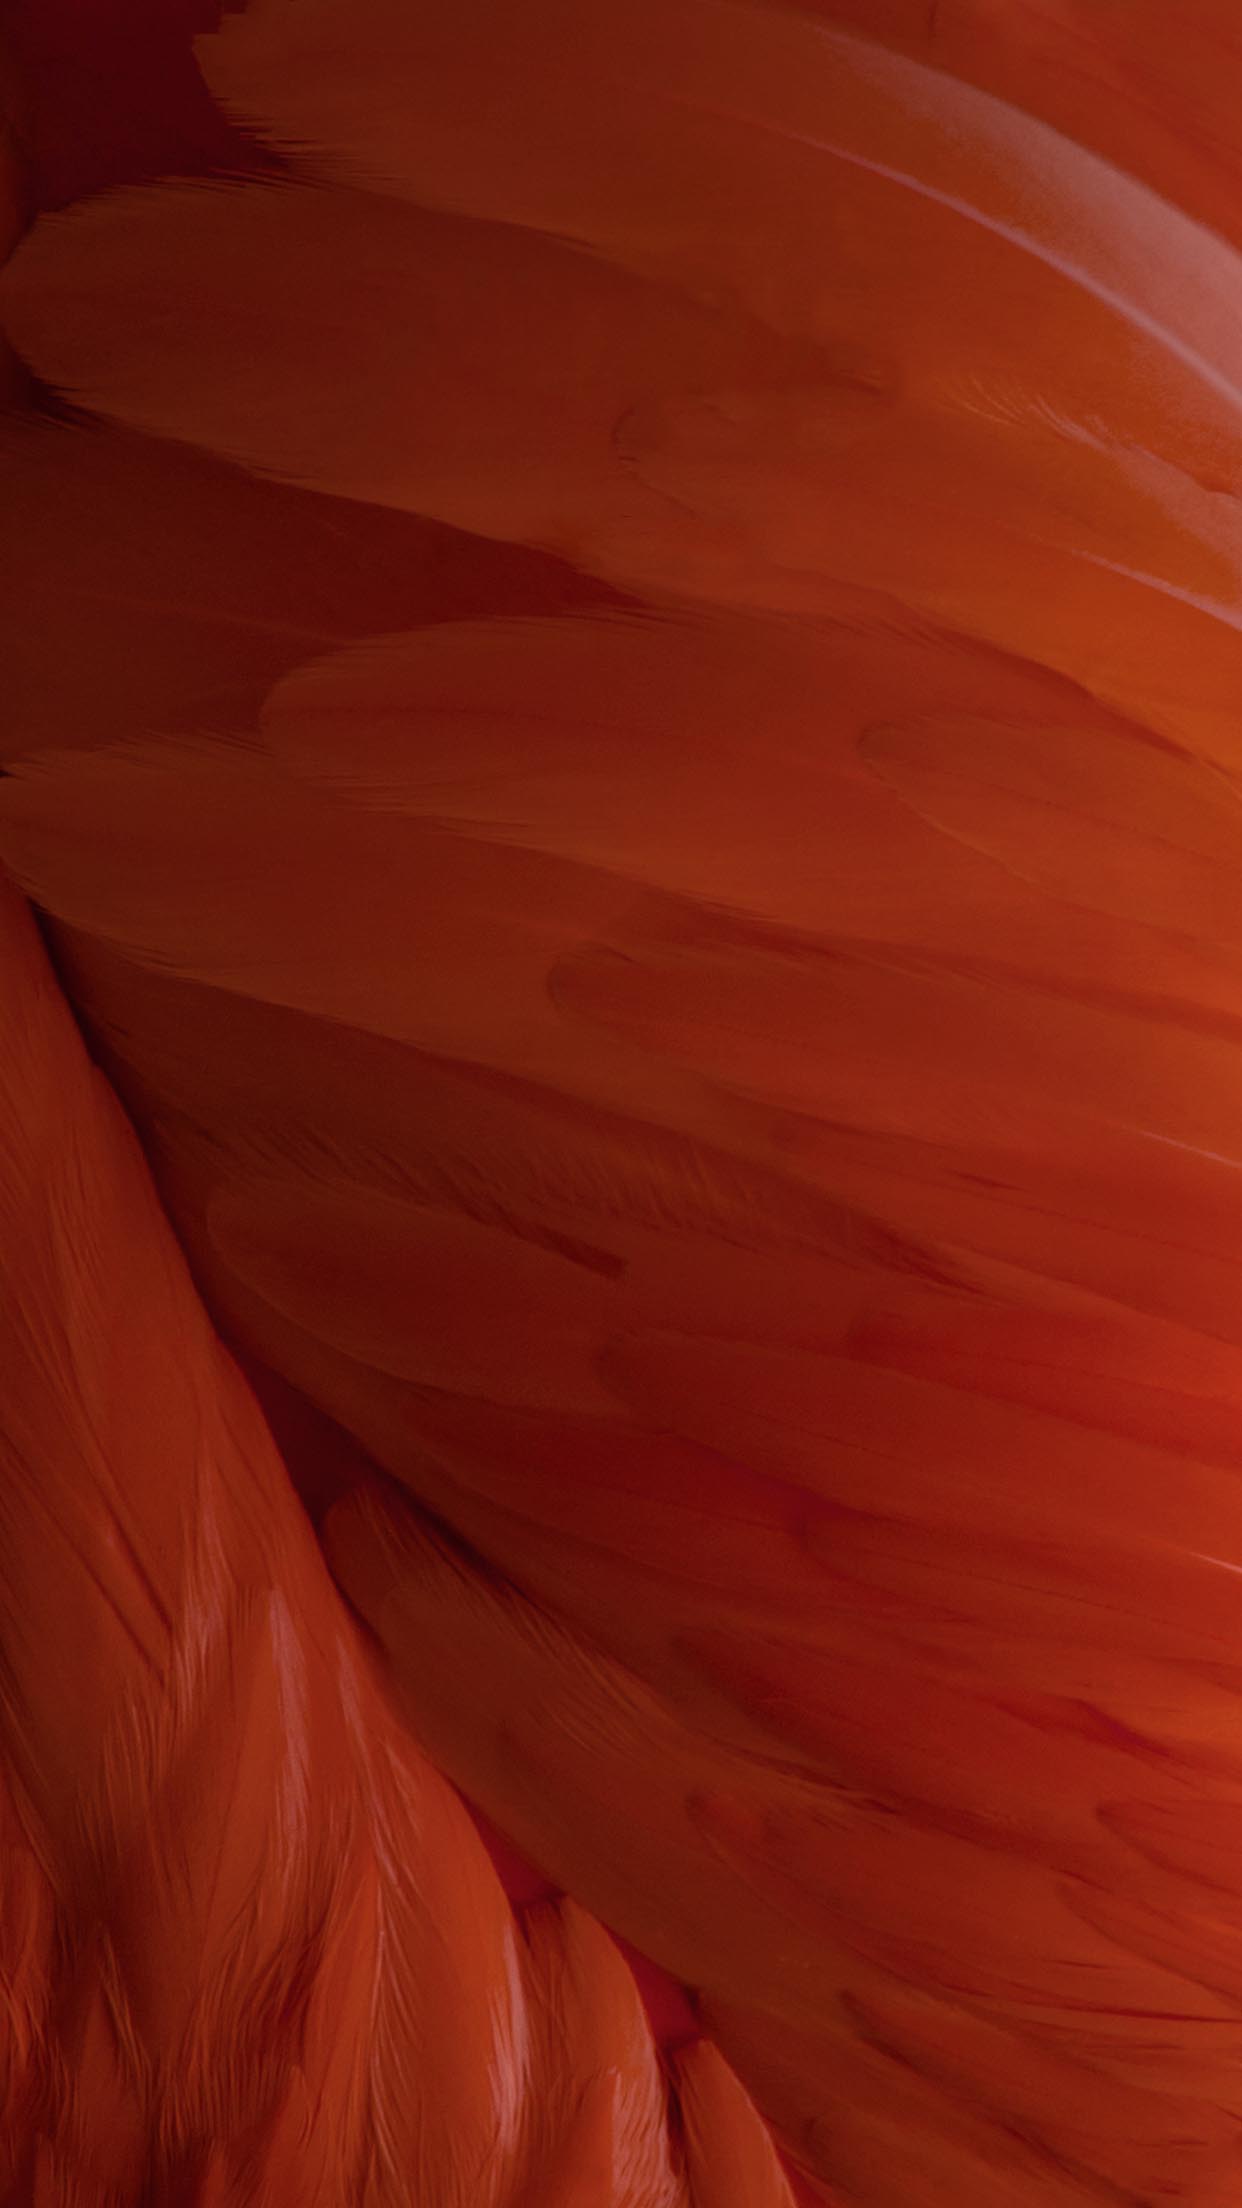 iOS 9 wallpapers now available to download